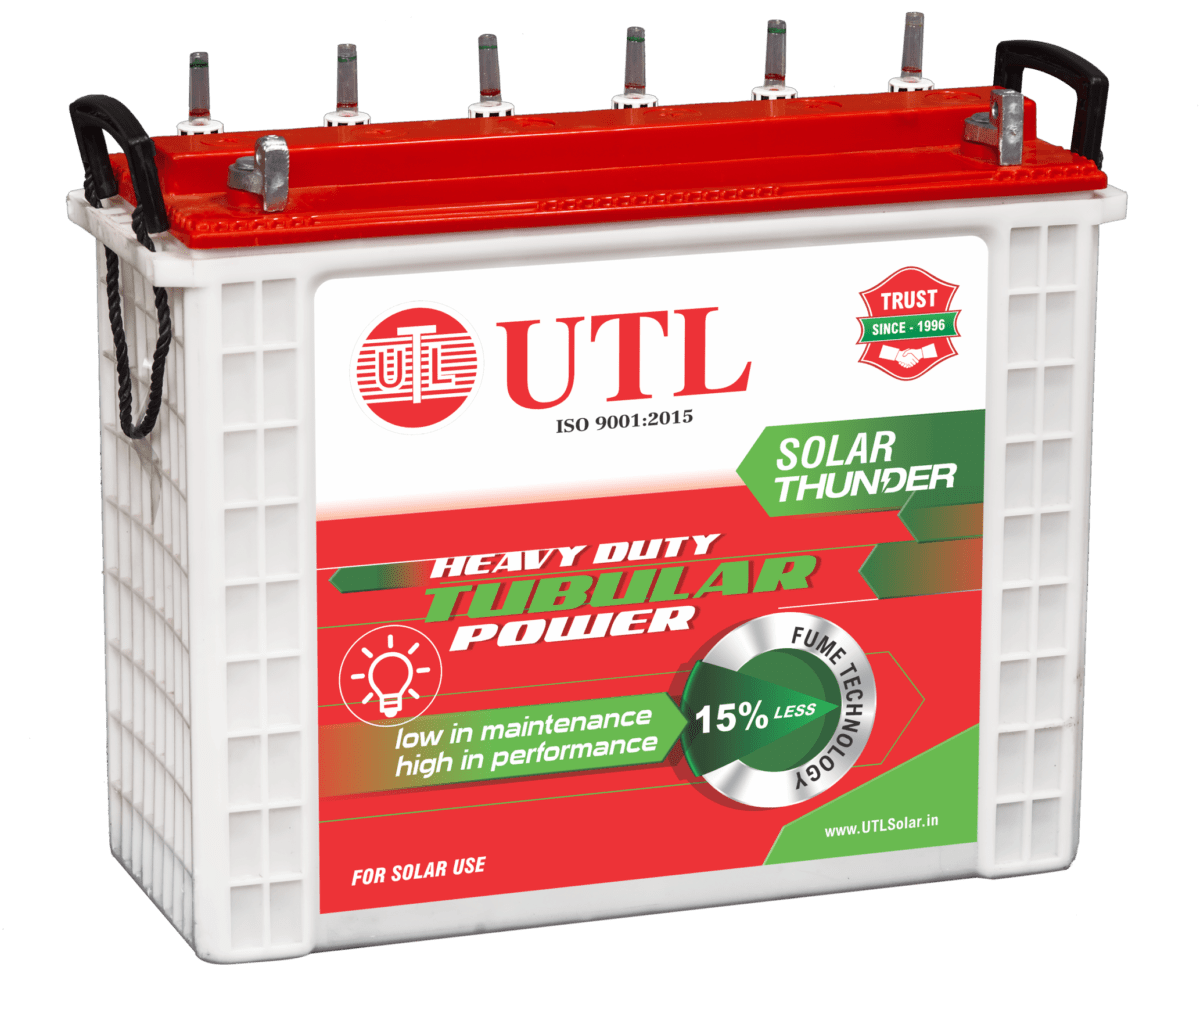 Powerful UTL 230Ah Solar Battery at Best Price with 3 Years Warranty